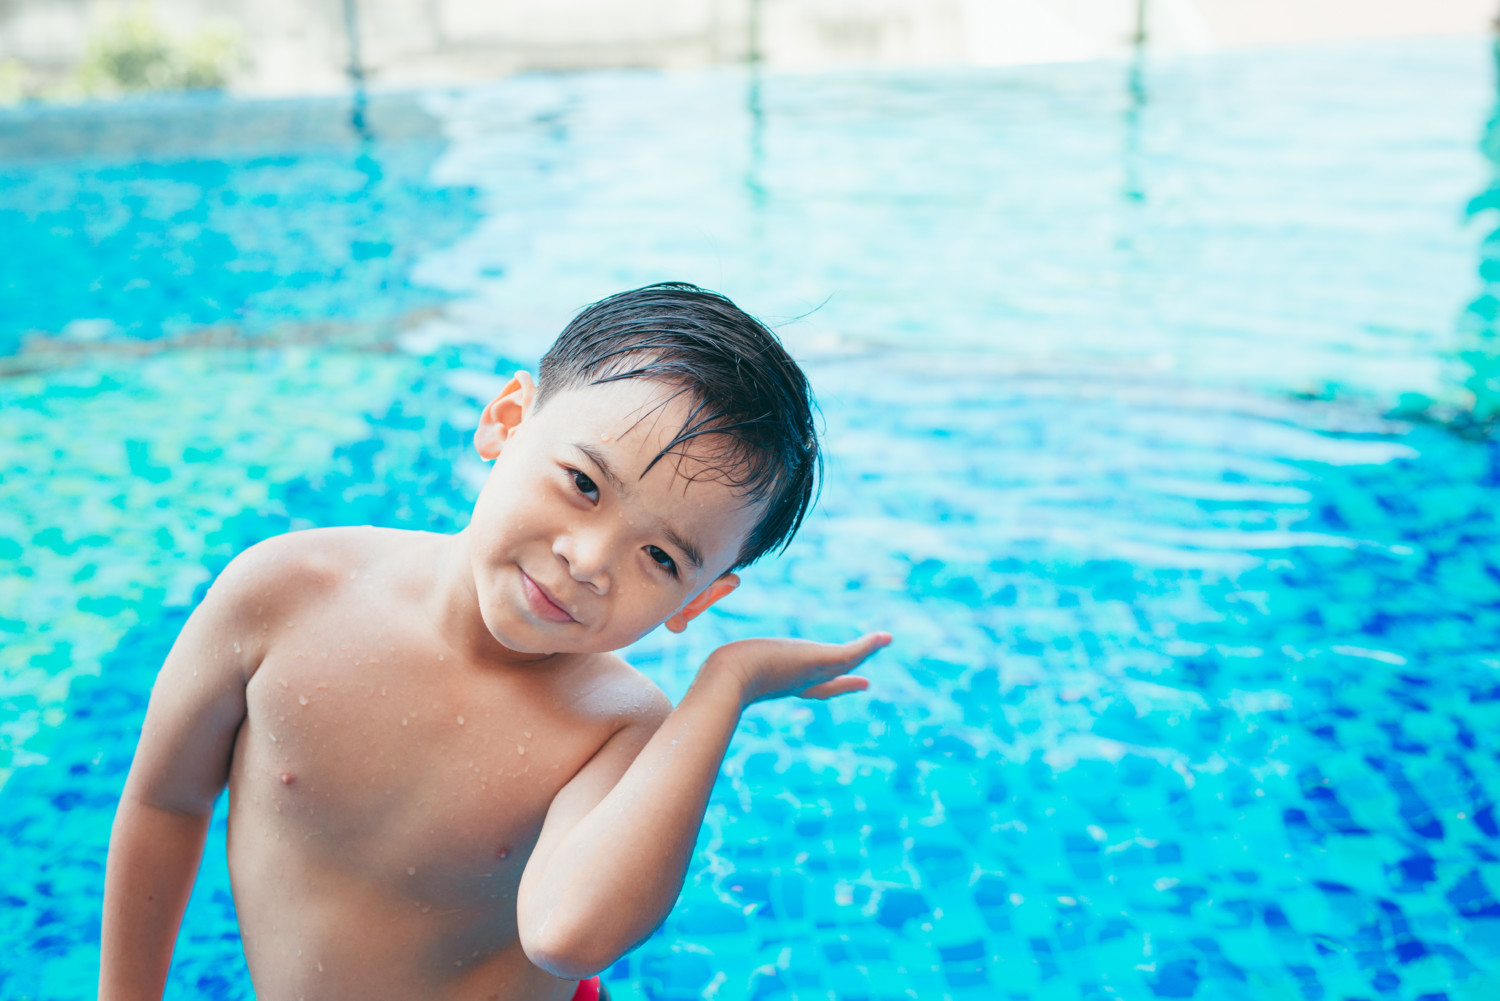 Child at pool has water in ear